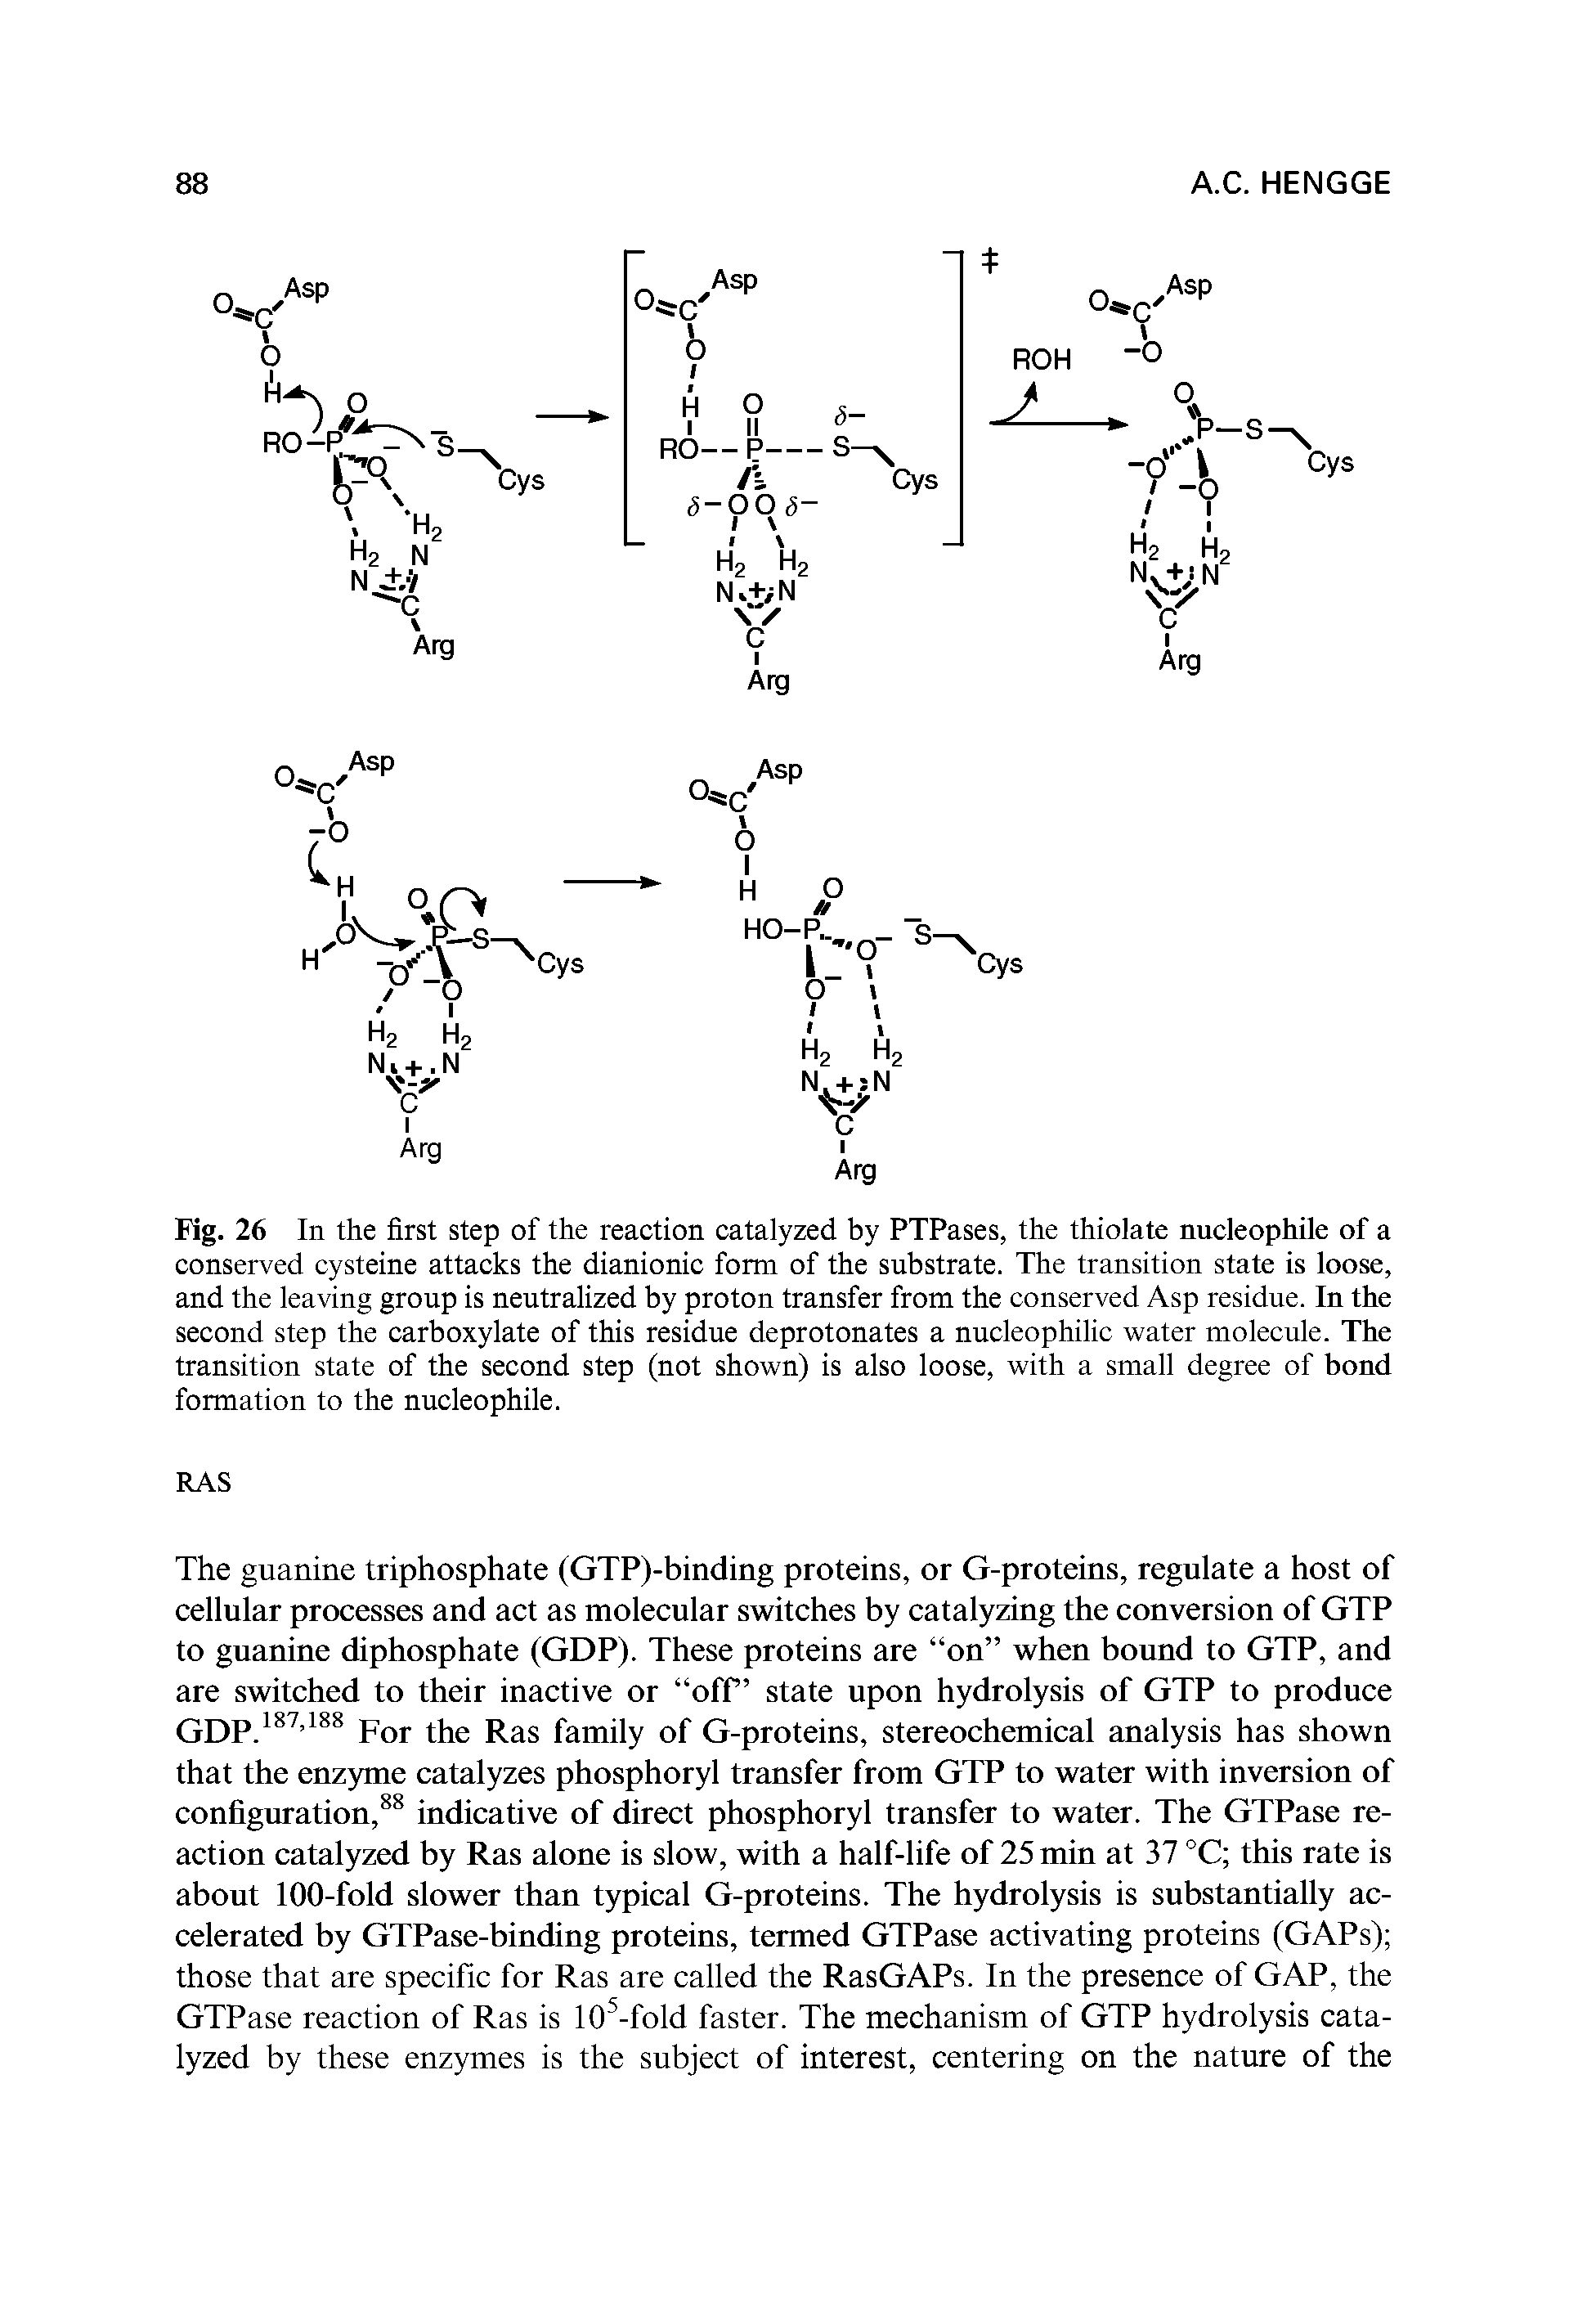 Fig. 26 In the first step of the reaction catalyzed by PTPases, the thiolate nucleophile of a conserved cysteine attacks the dianionic form of the substrate. The transition state is loose, and the leaving group is neutralized by proton transfer from the conserved Asp residue. In the second step the carboxylate of this residue deprotonates a nucleophilic water molecule. The transition state of the second step (not shown) is also loose, with a small degree of bond formation to the nucleophile.